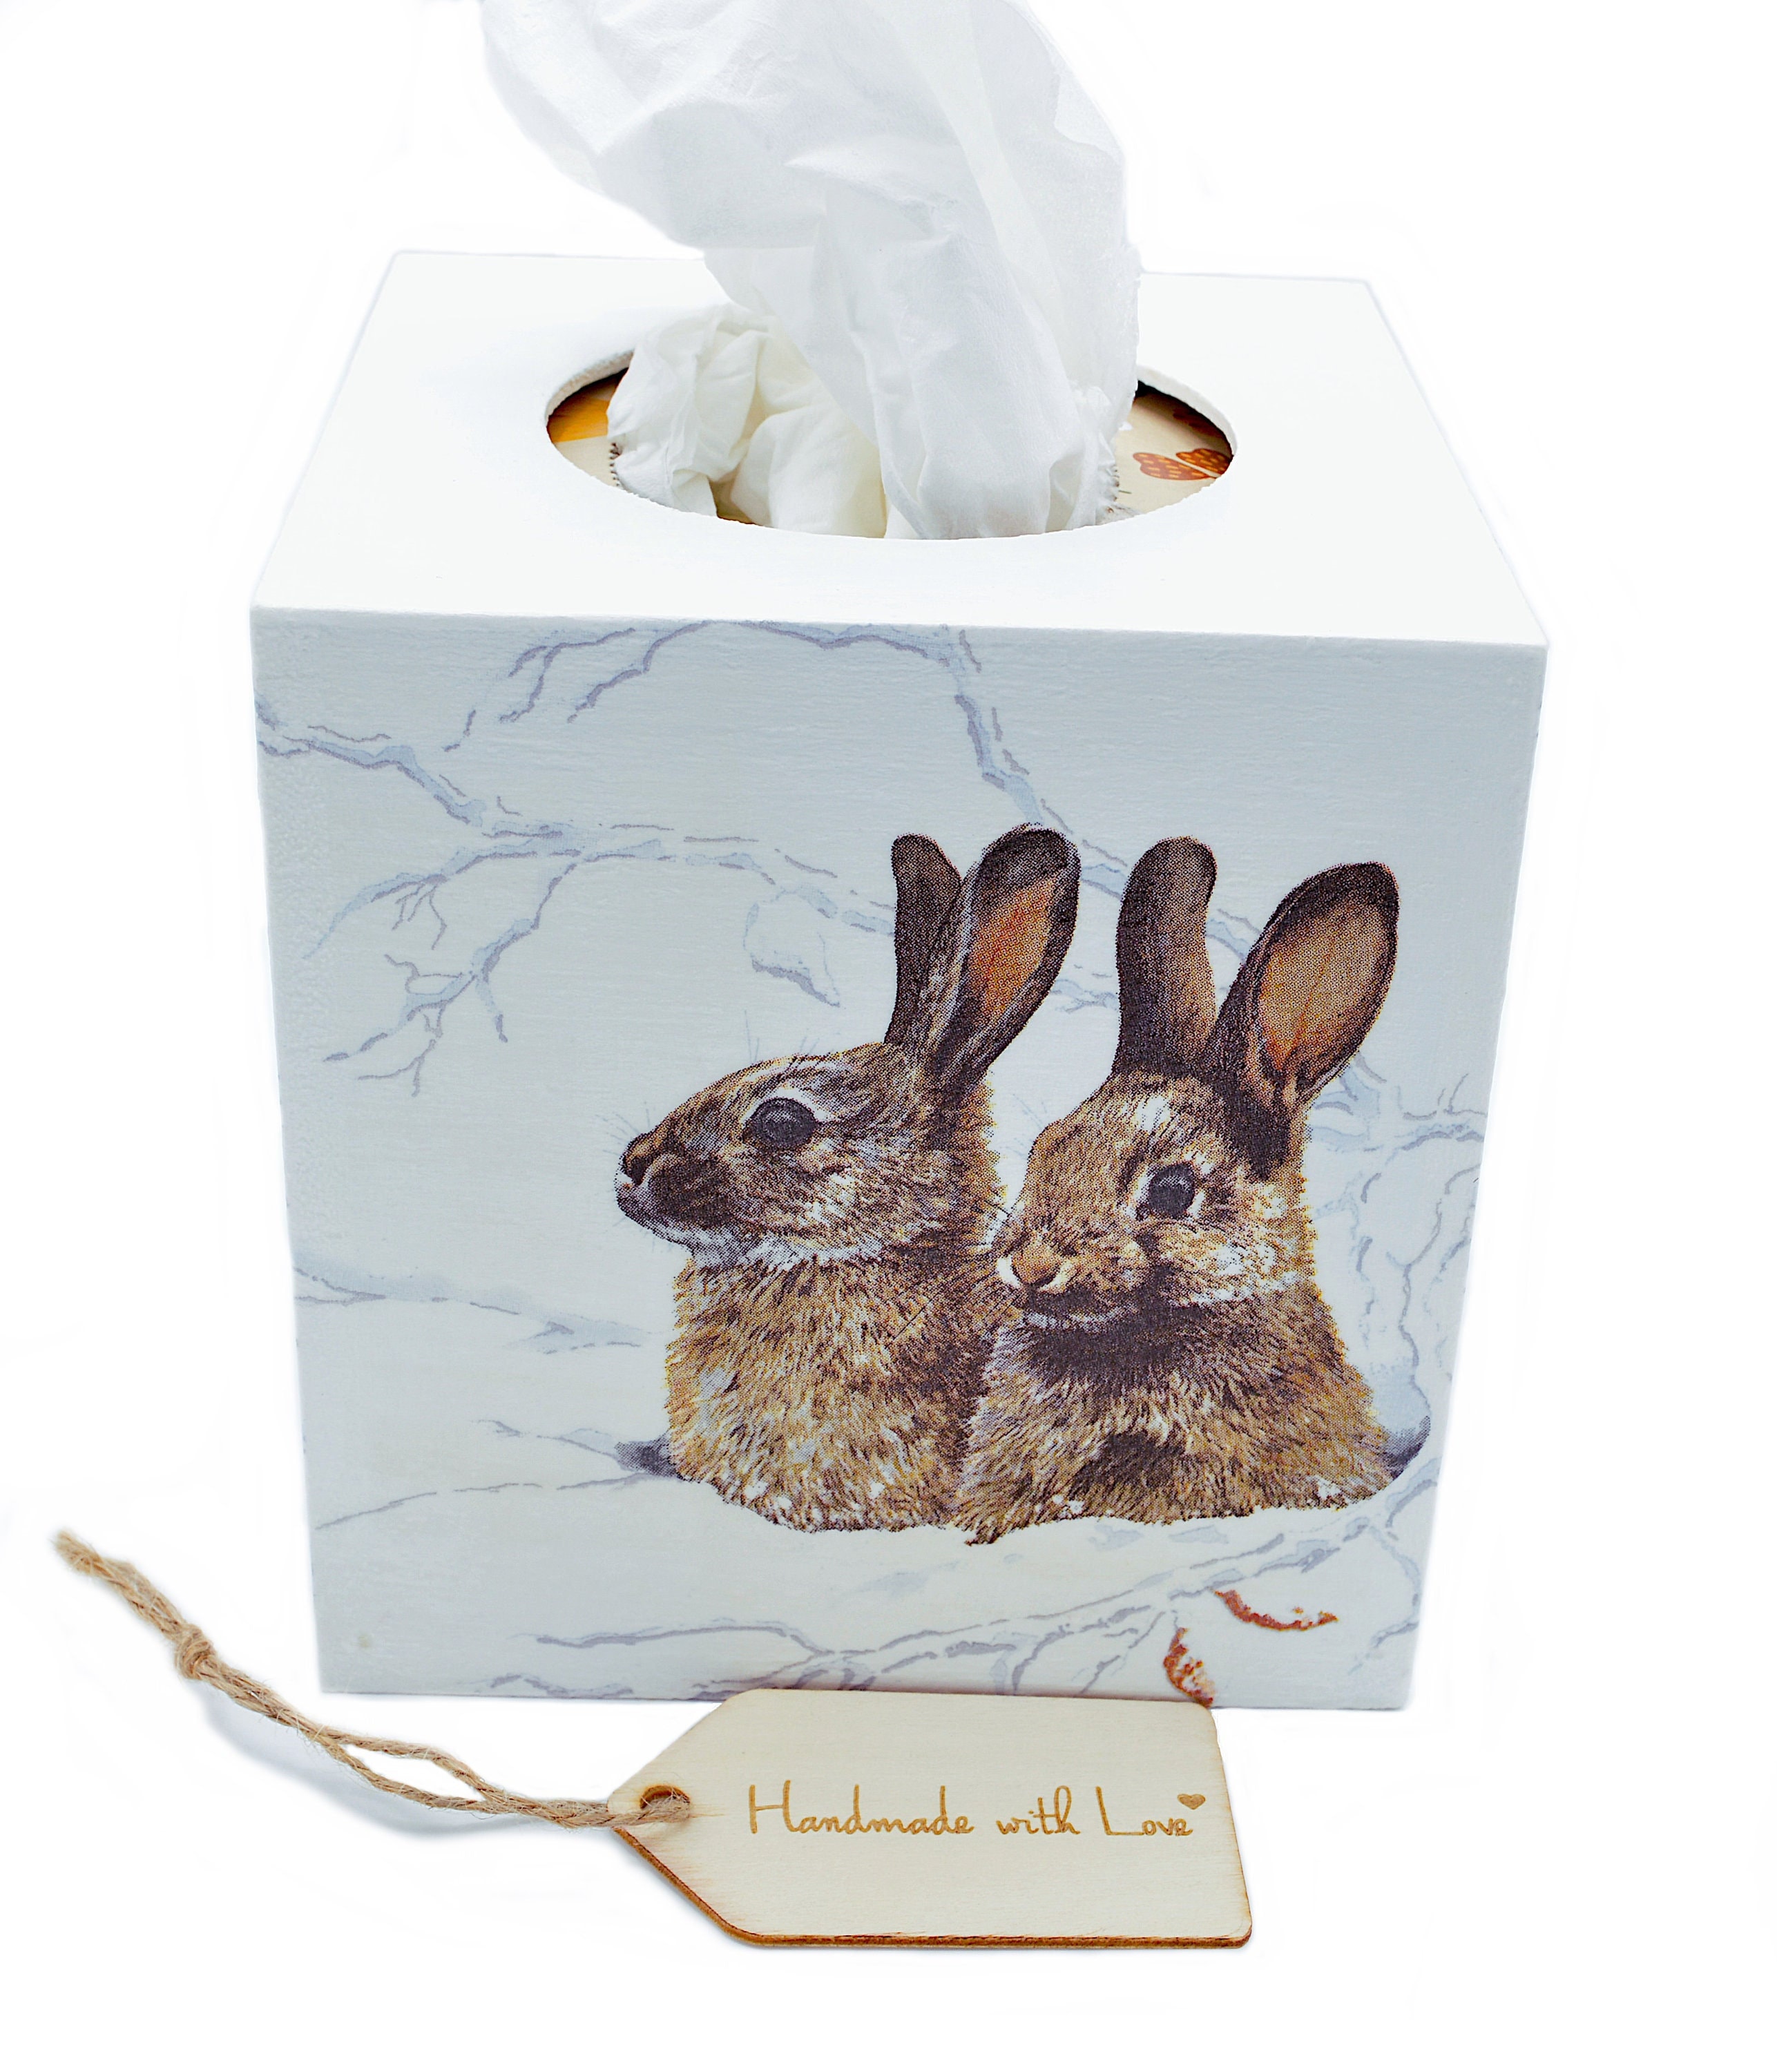 Standing Hare on Black Tissue Box Cover